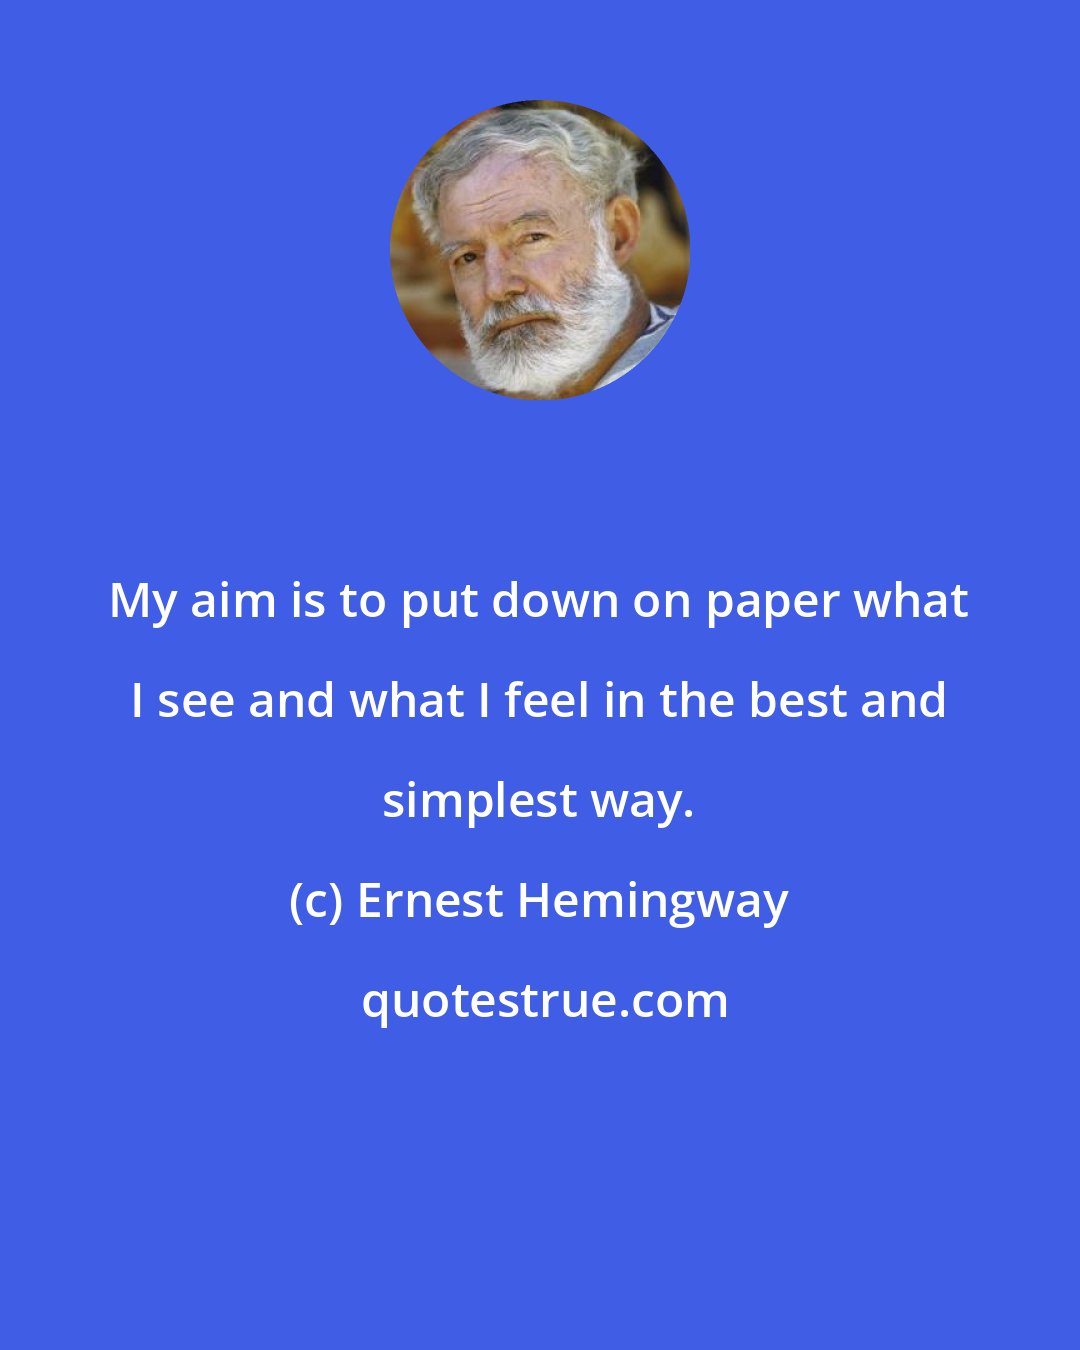 Ernest Hemingway: My aim is to put down on paper what I see and what I feel in the best and simplest way.